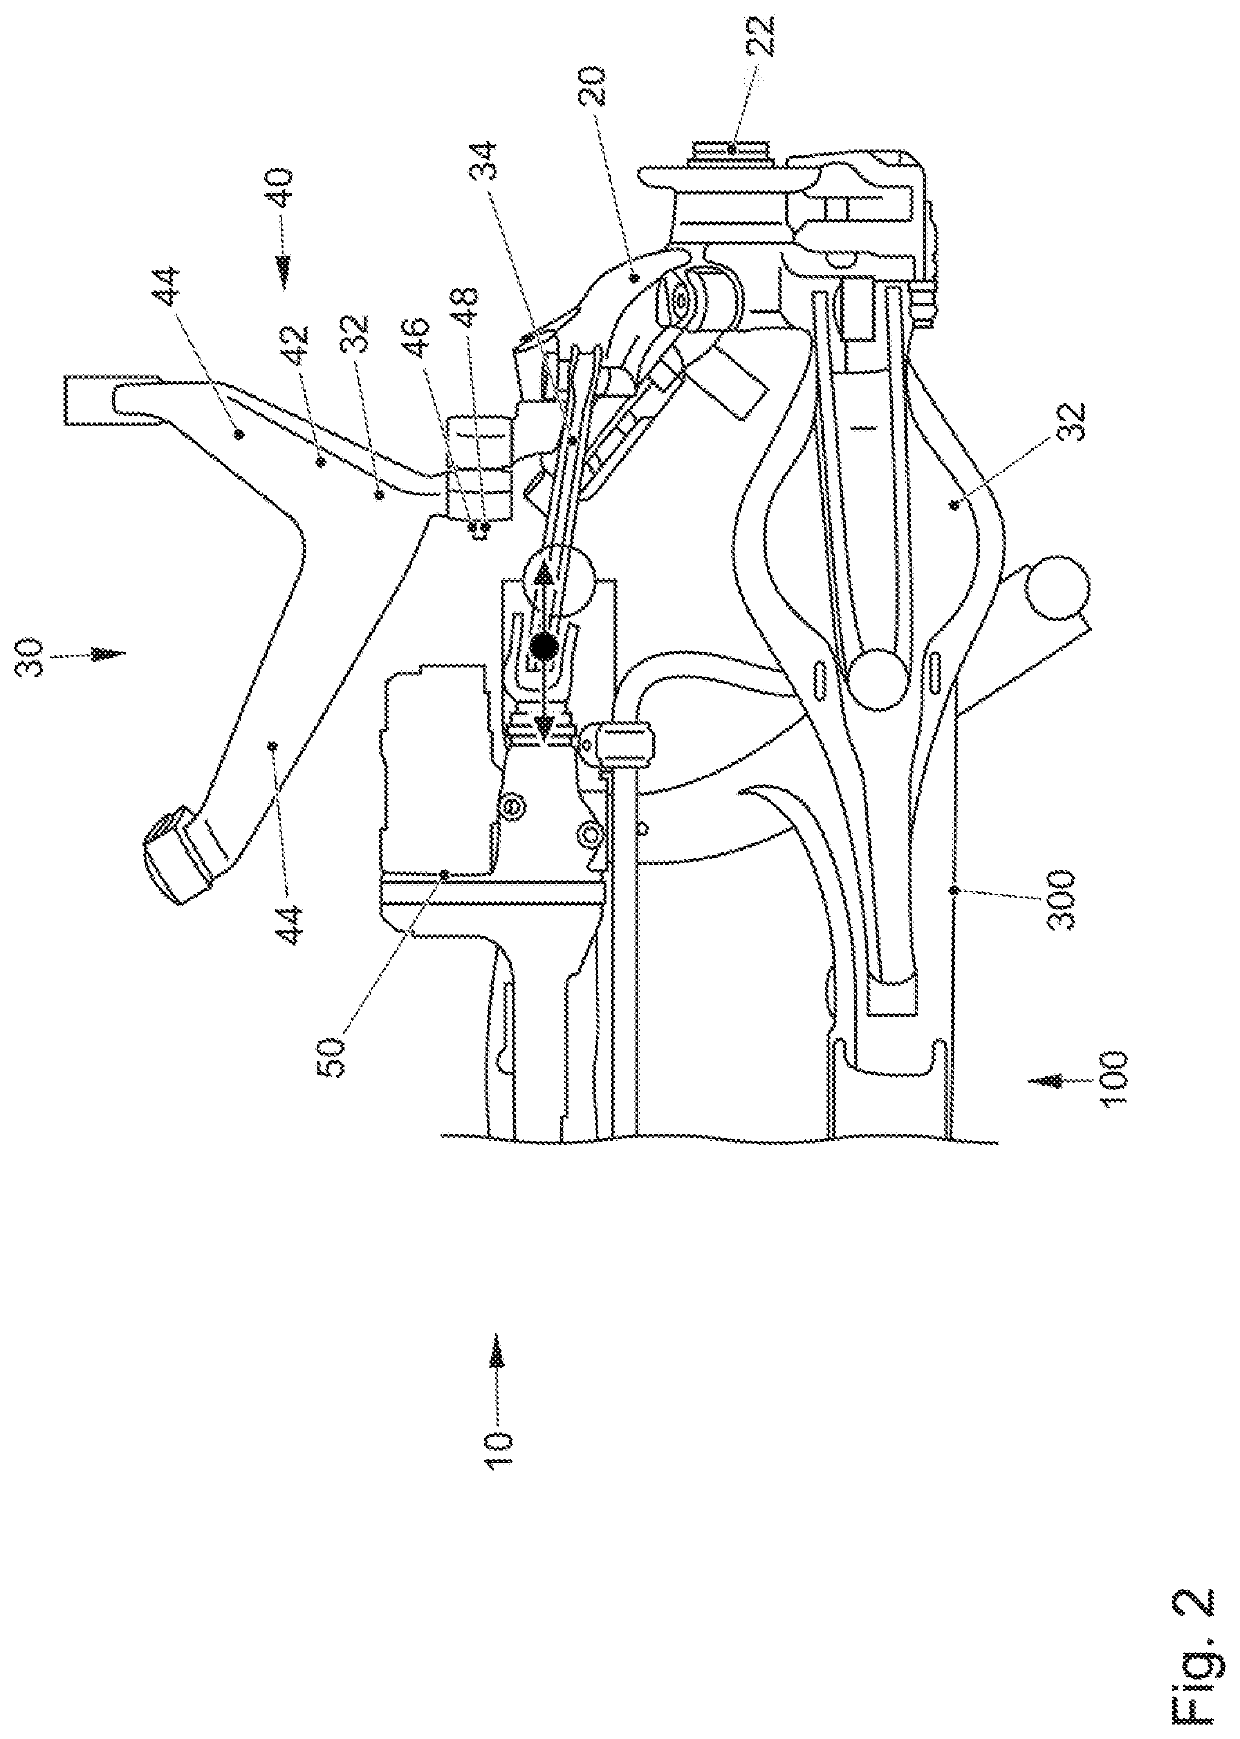 Wheel suspension for the rear axle of a vehicle